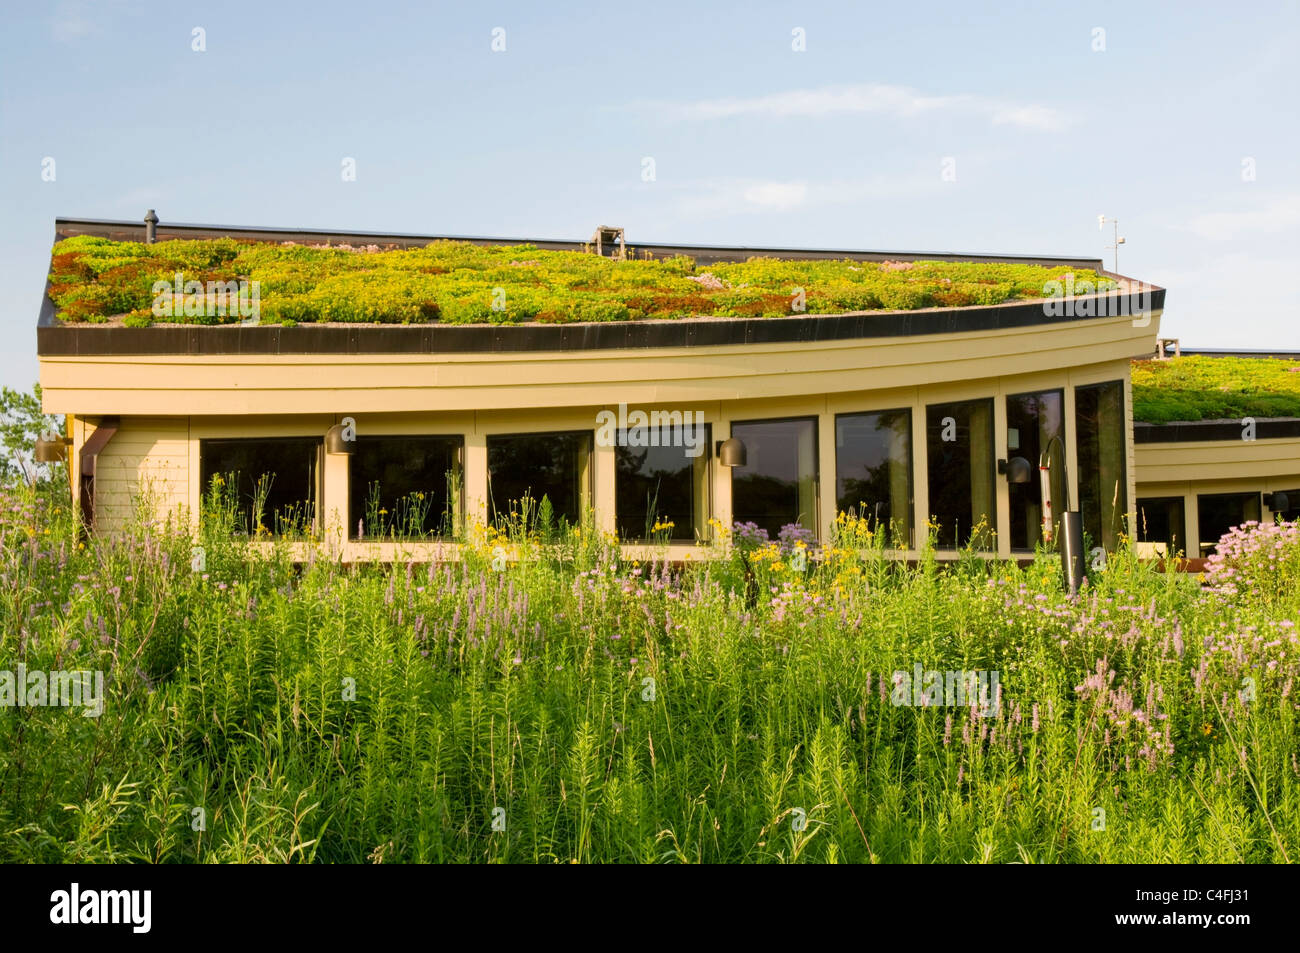 lebanon hills visitor center in eagan minnesota showing vegetation on green roof and garden in foreground Stock Photo